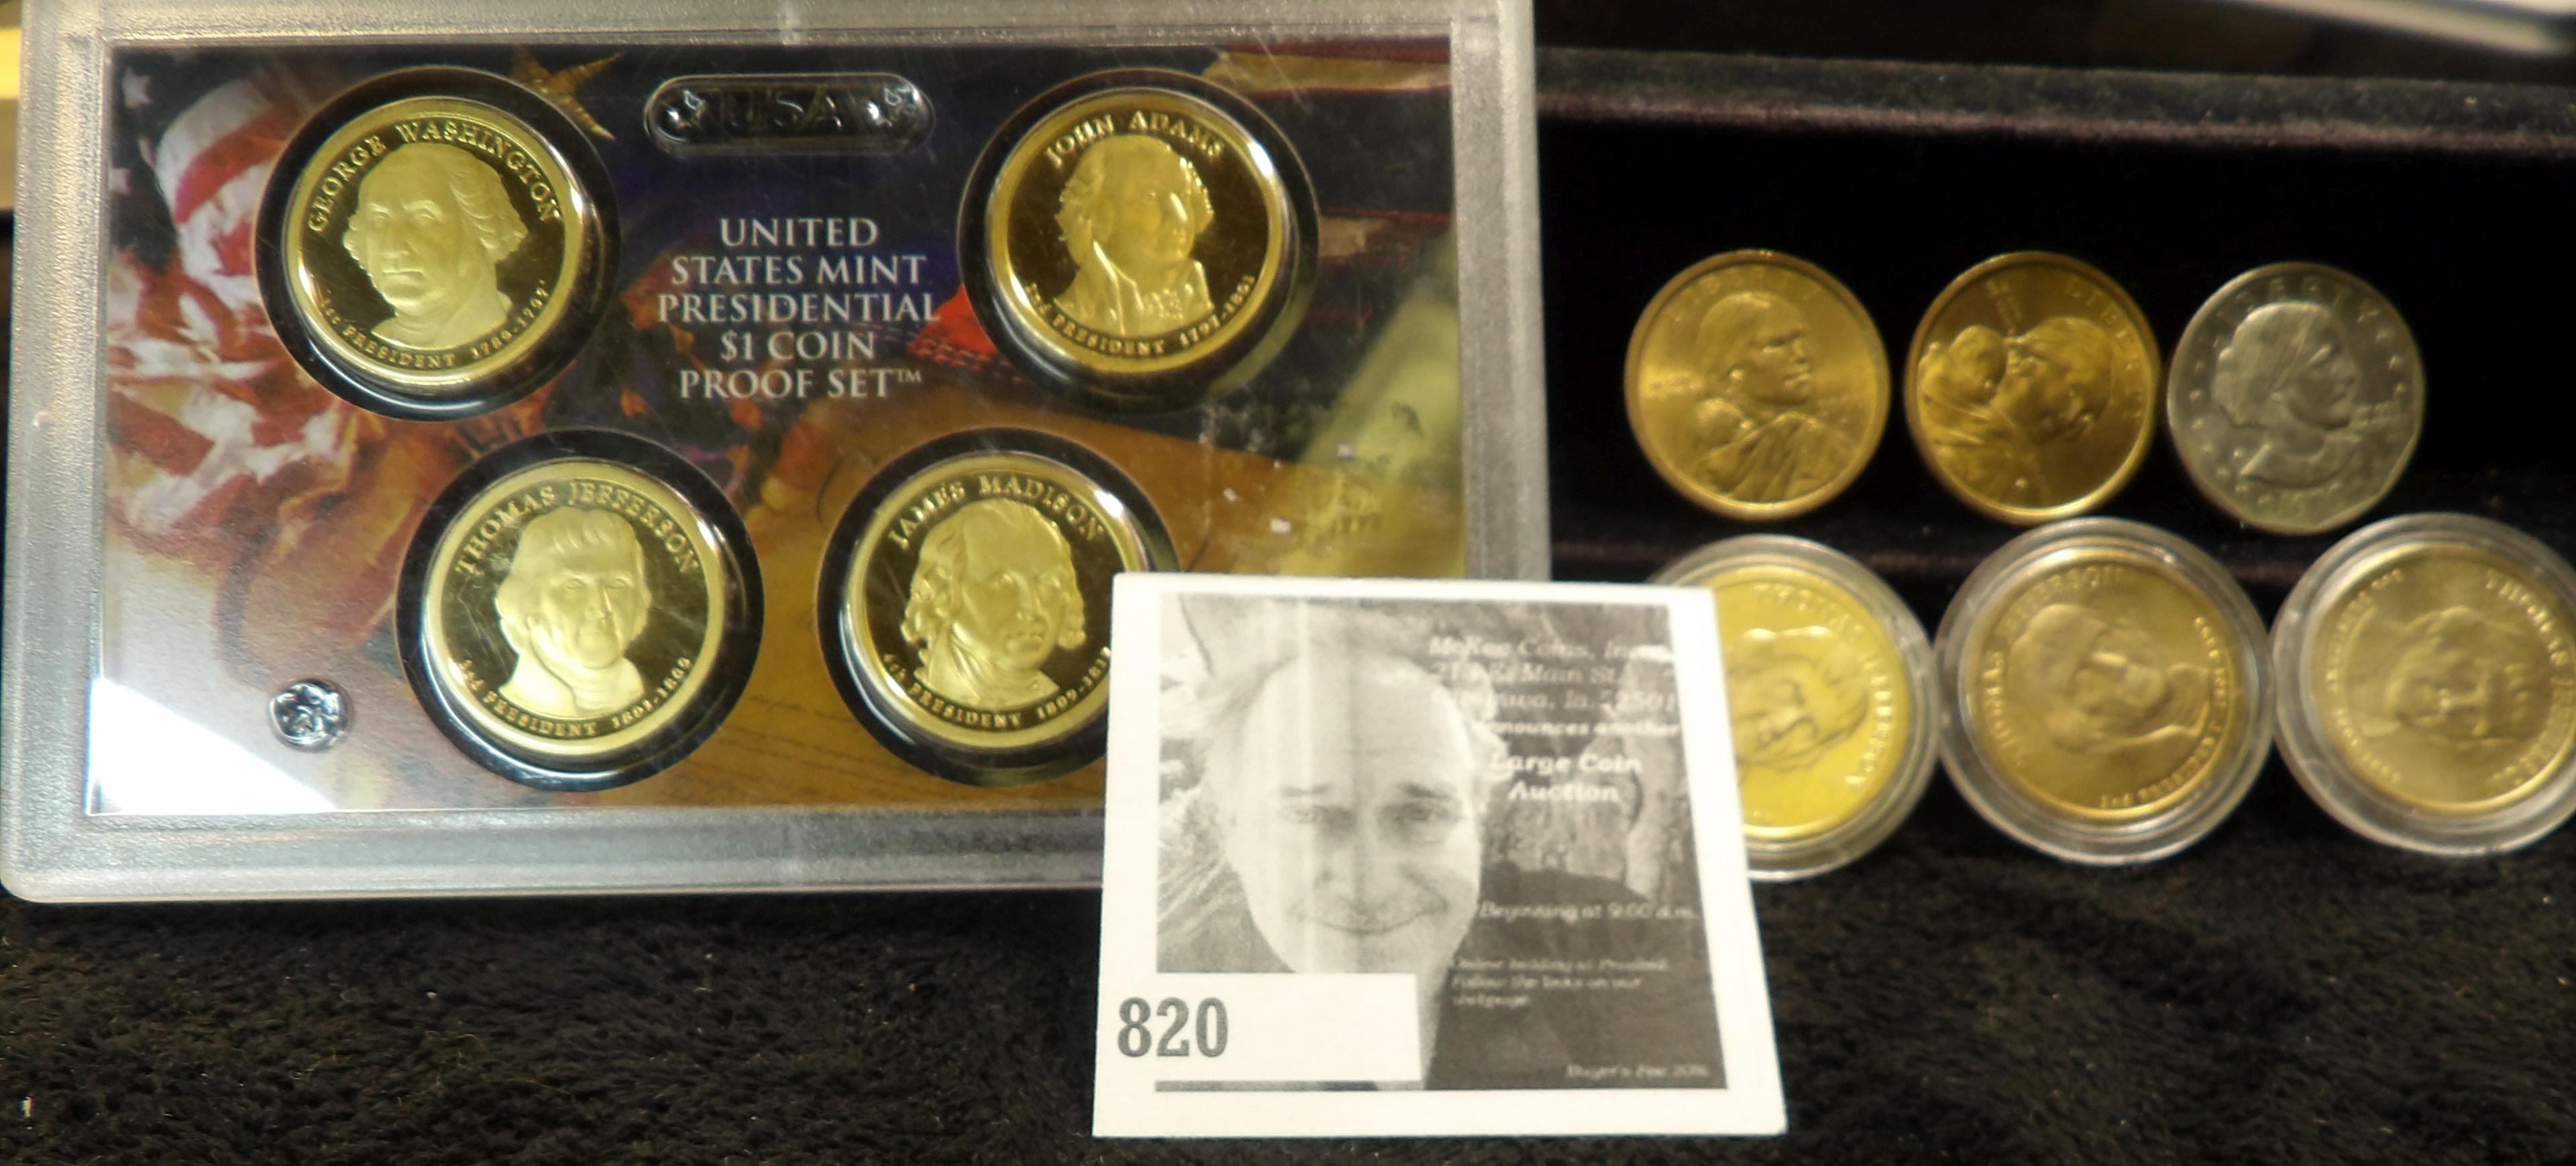 2007 S Presidential Dollar Four-piece Proof Set in plastic case & (6) more U.S. Dollar Coins, loose.